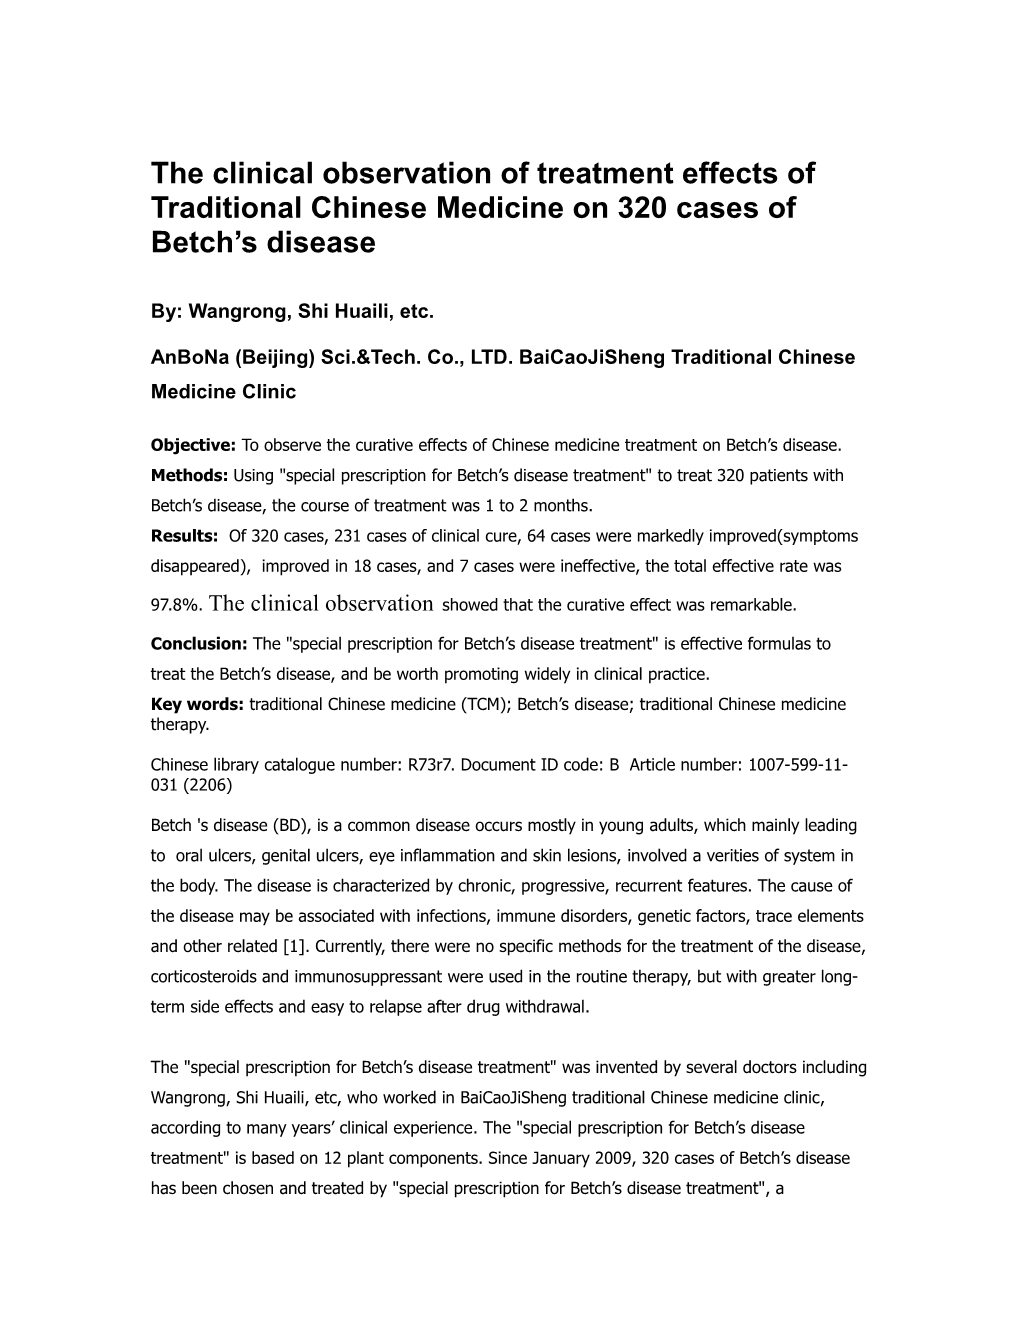 The Clinical Observation of Treatment Effects of Traditional Chinese Medicine on 320 Patients